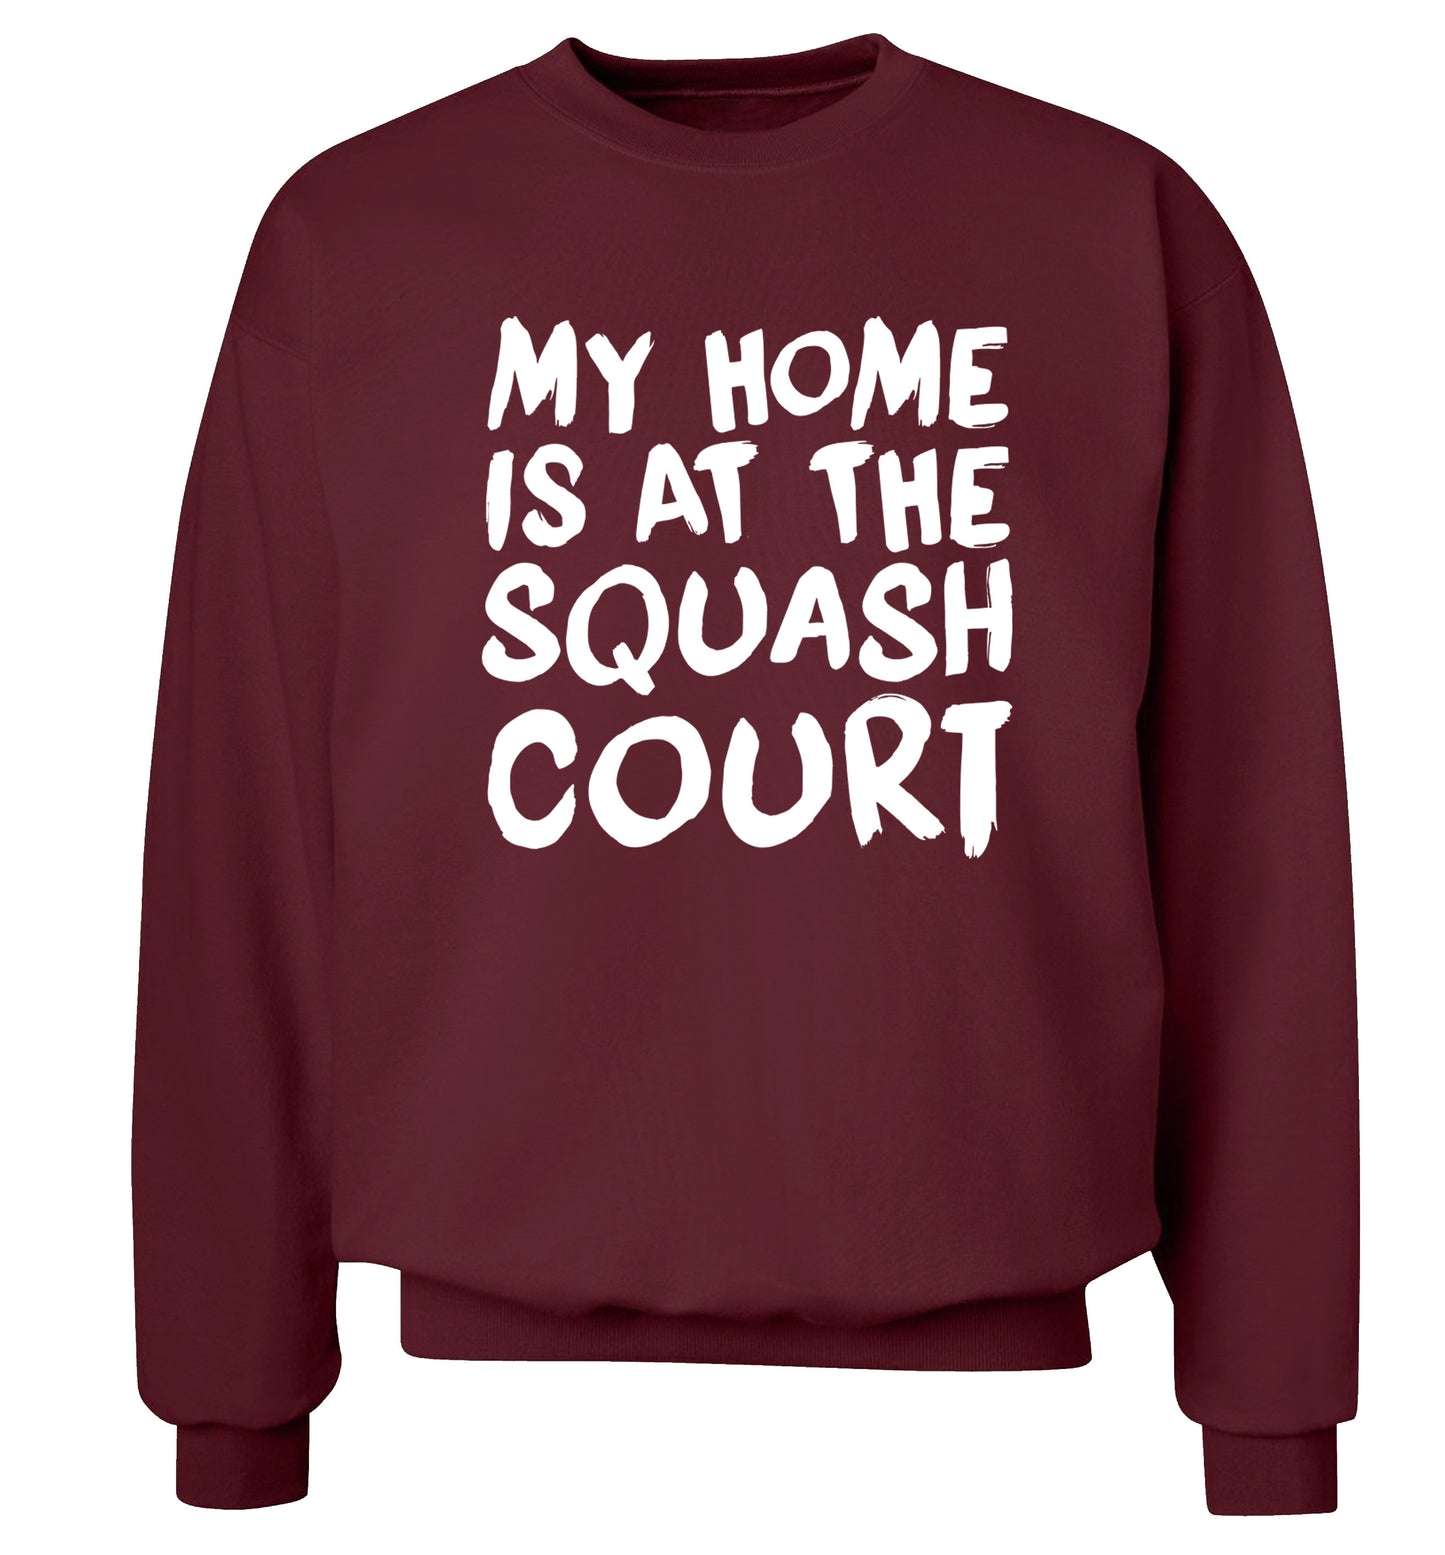 My home is at the squash court Adult's unisex maroon Sweater 2XL